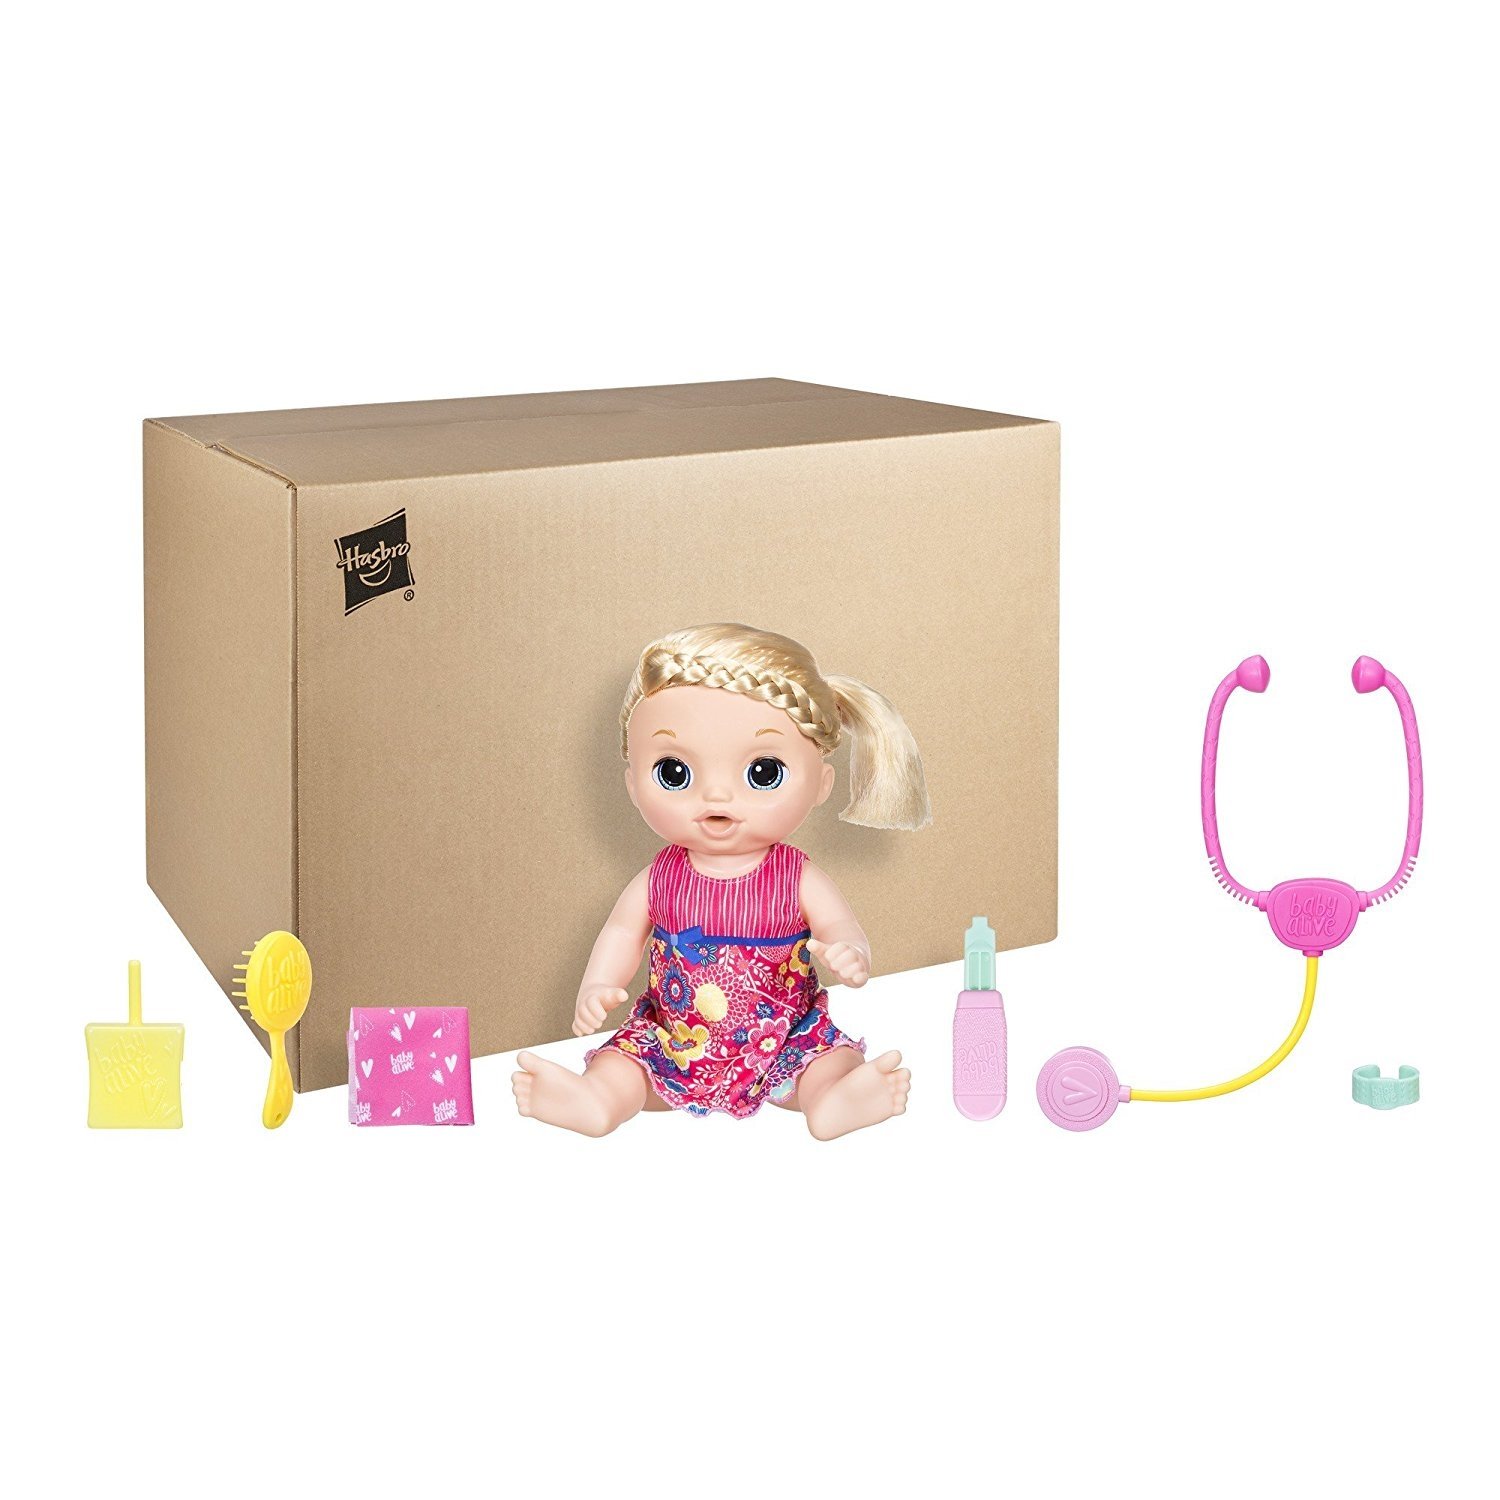 Baby Alive Sweet Tears Blonde Hair Baby Doll, Cries Tears, Doctor Visit Accessories - image 5 of 9